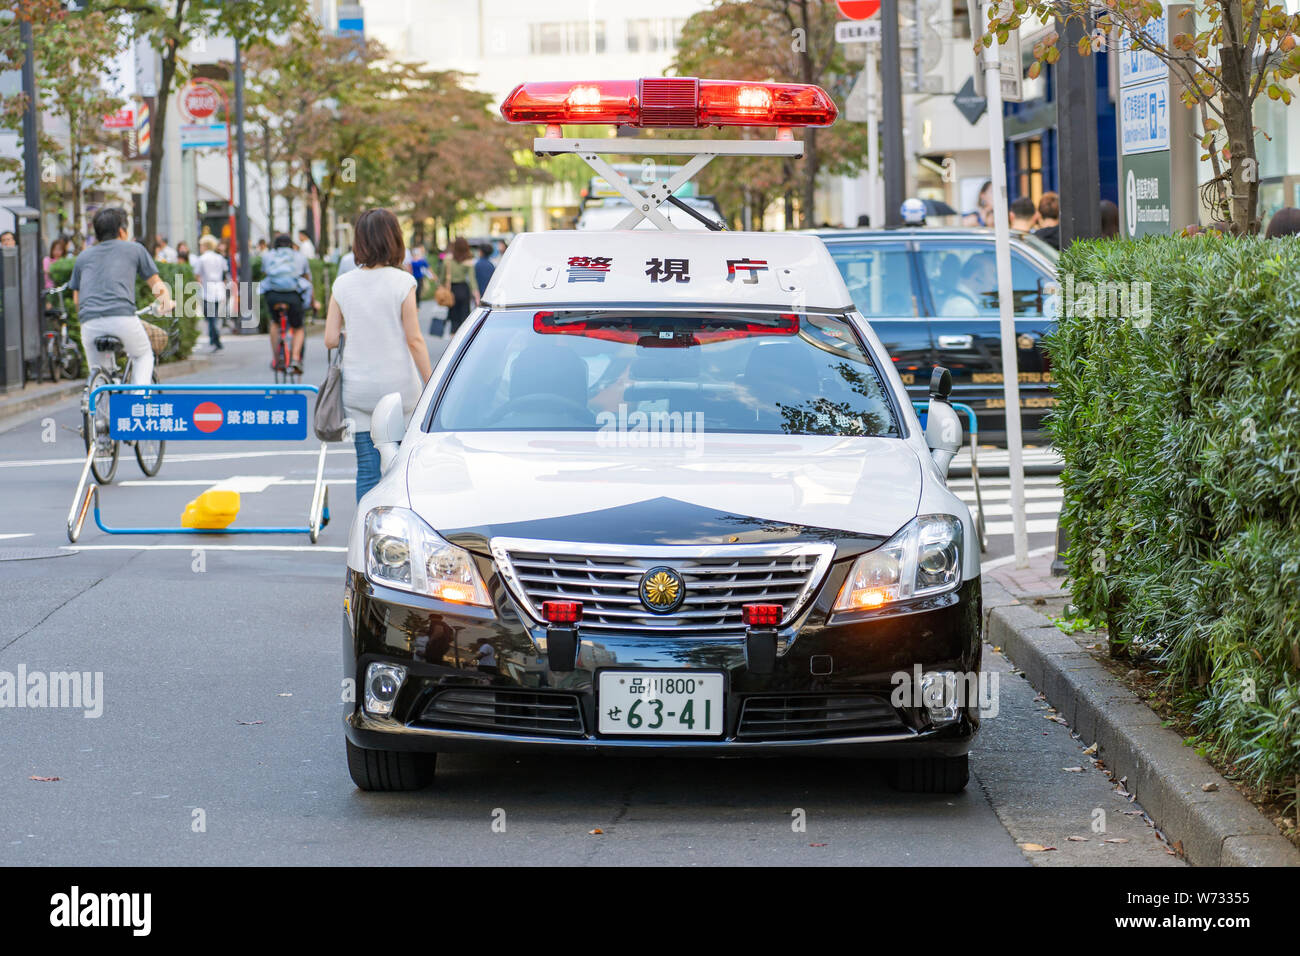 TOKYO, JAPAN - OCTOBER 6, 2018. Signal Light Is On The Japanese Police Patrol Car. Light Alarm Is Blinking At Upper Setting Position. Stock Photo